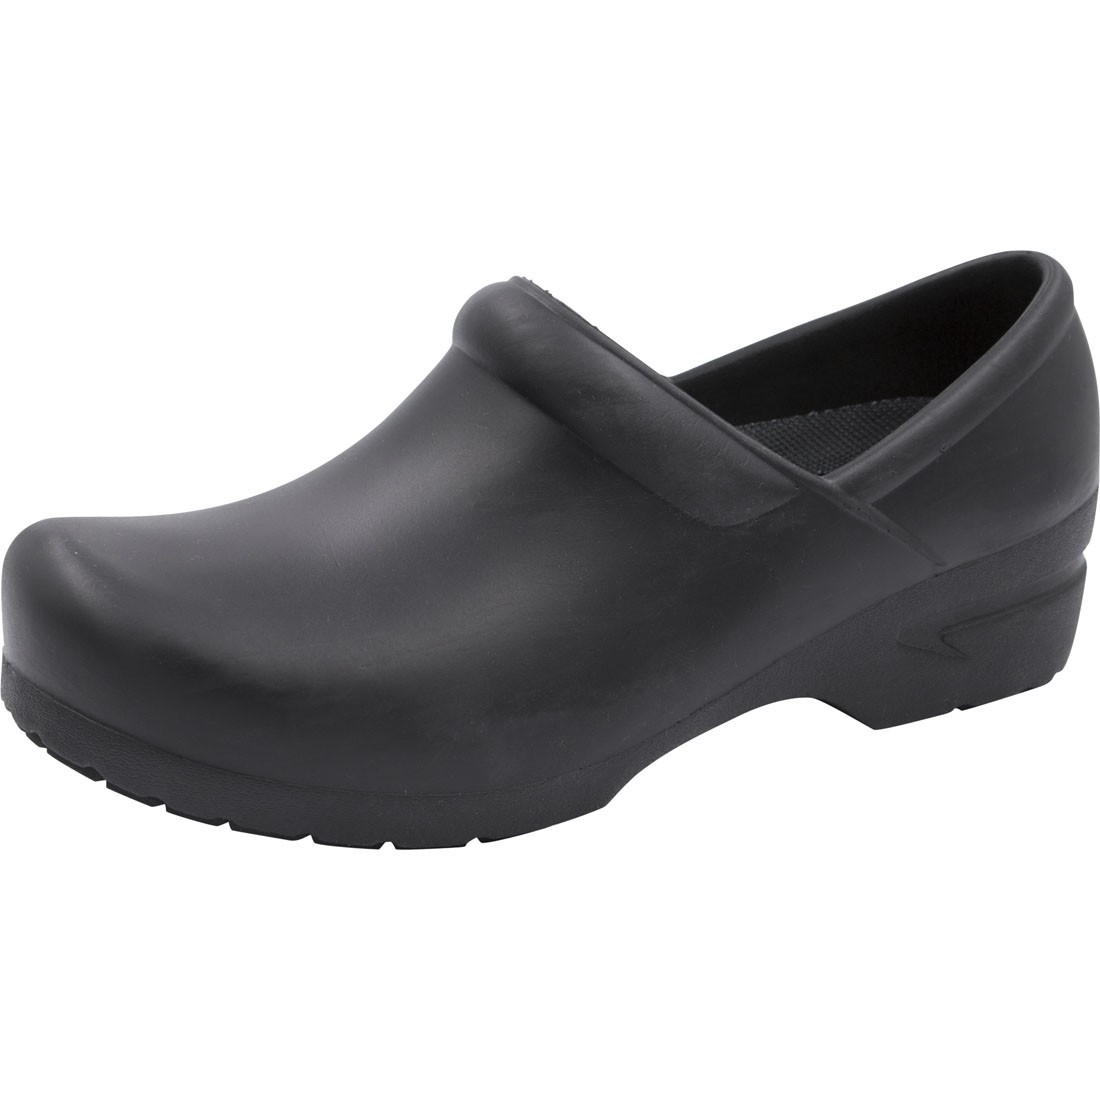 Picture of Anywear Guardianangel Blk 11 Guardianangel - protective Plastic Stepin, Black - Size 11